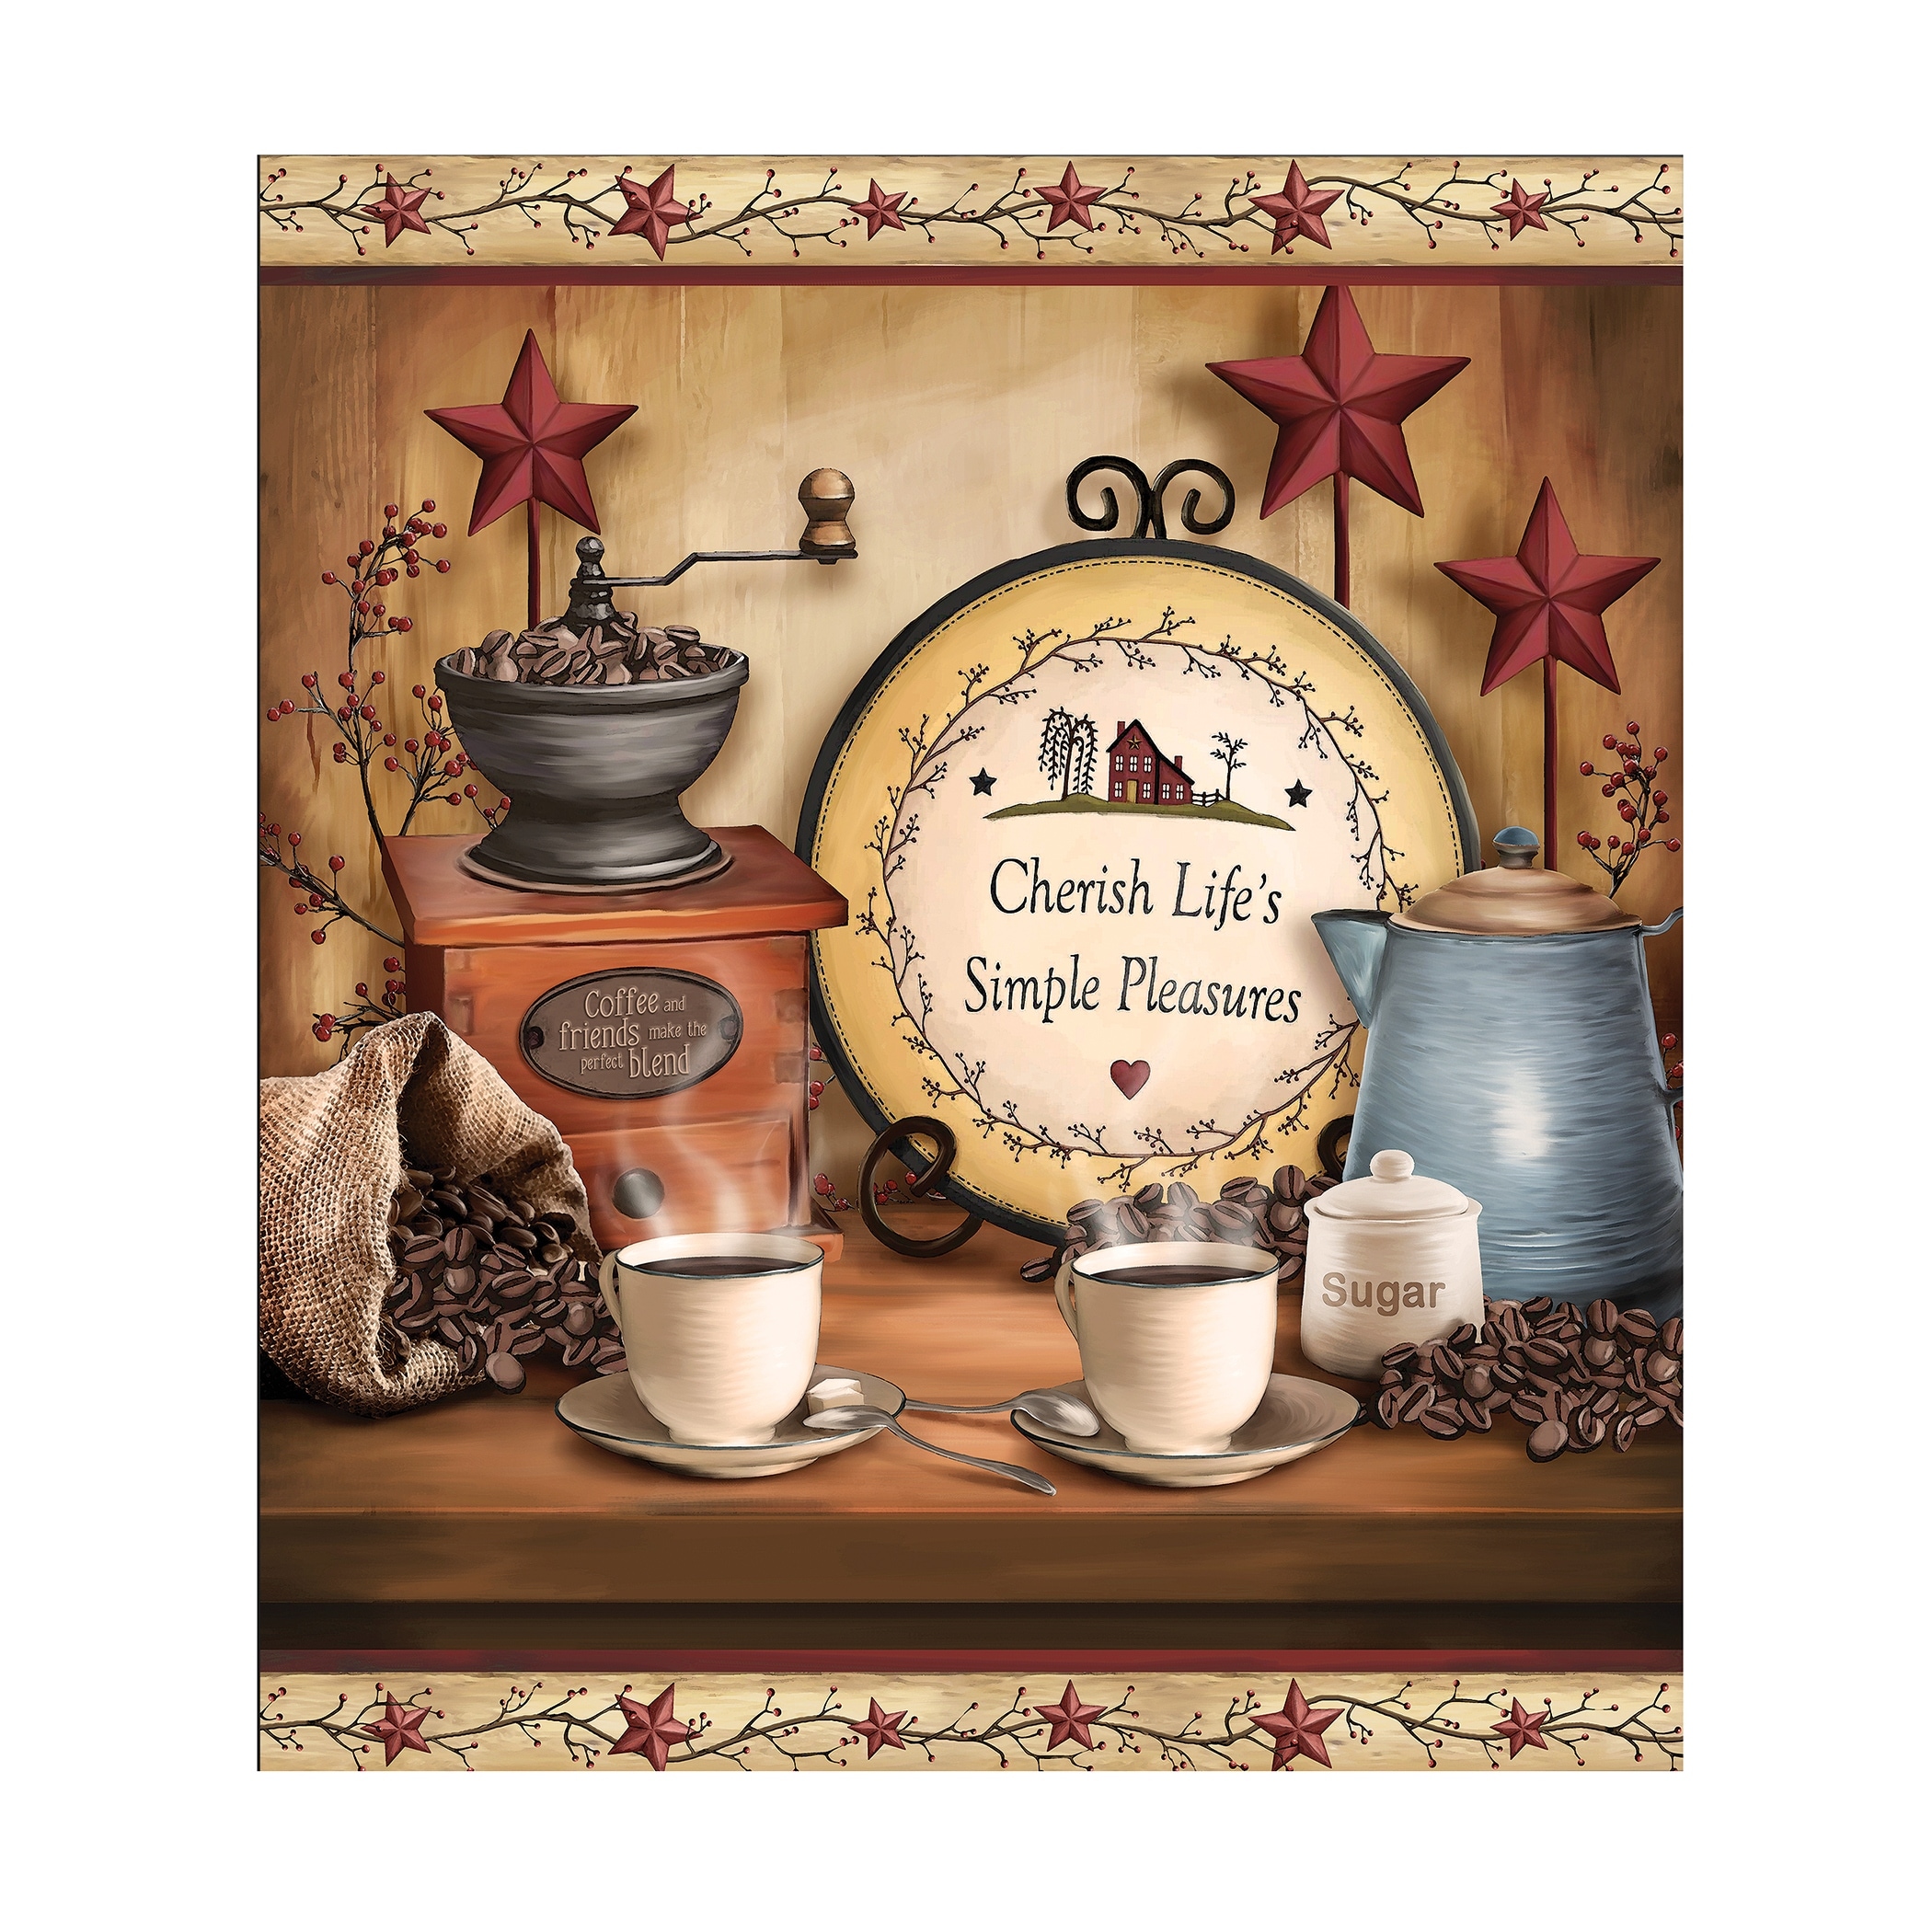 https://ak1.ostkcdn.com/images/products/is/images/direct/94a4f4c5980e5a152f0e6d93c97197c82139ff81/Primitive-Country-Coffee-Dishwasher-Magnet-Cover.jpg